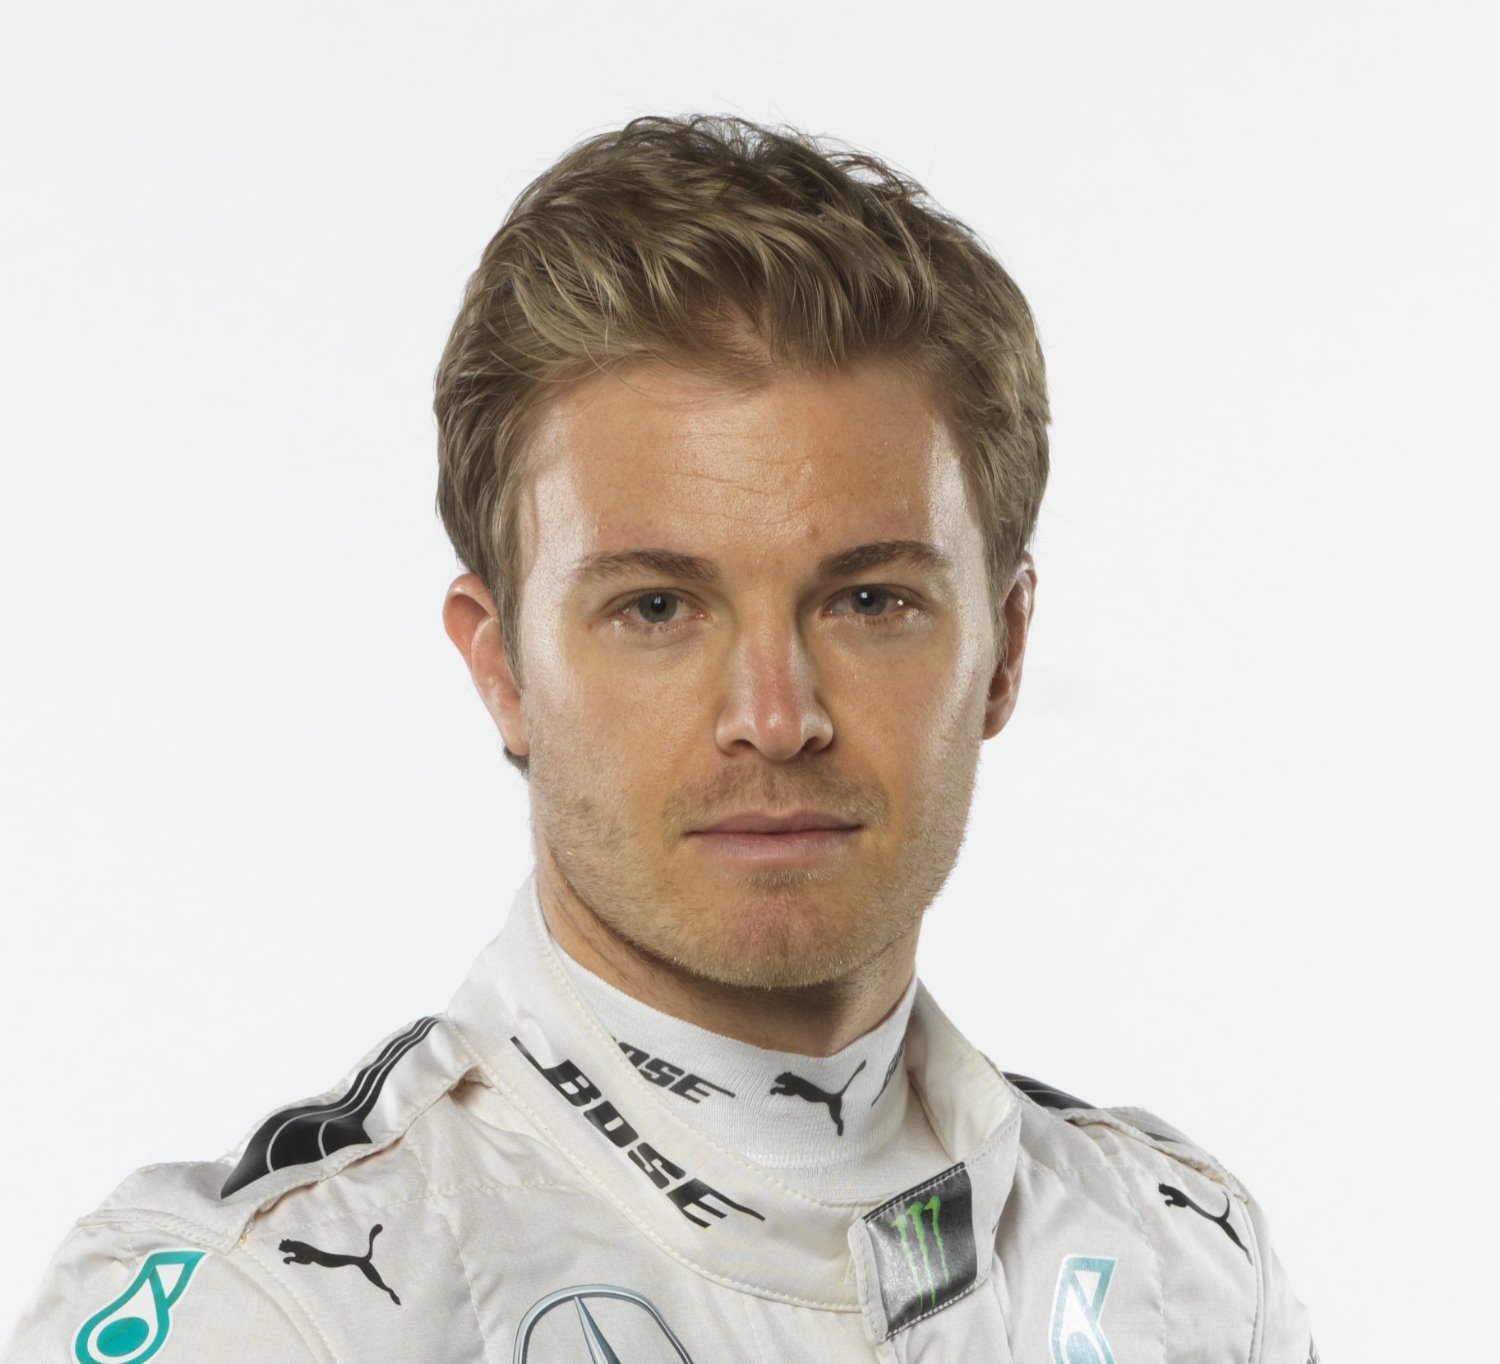 Apparantly Rosberg did not need the $50 million